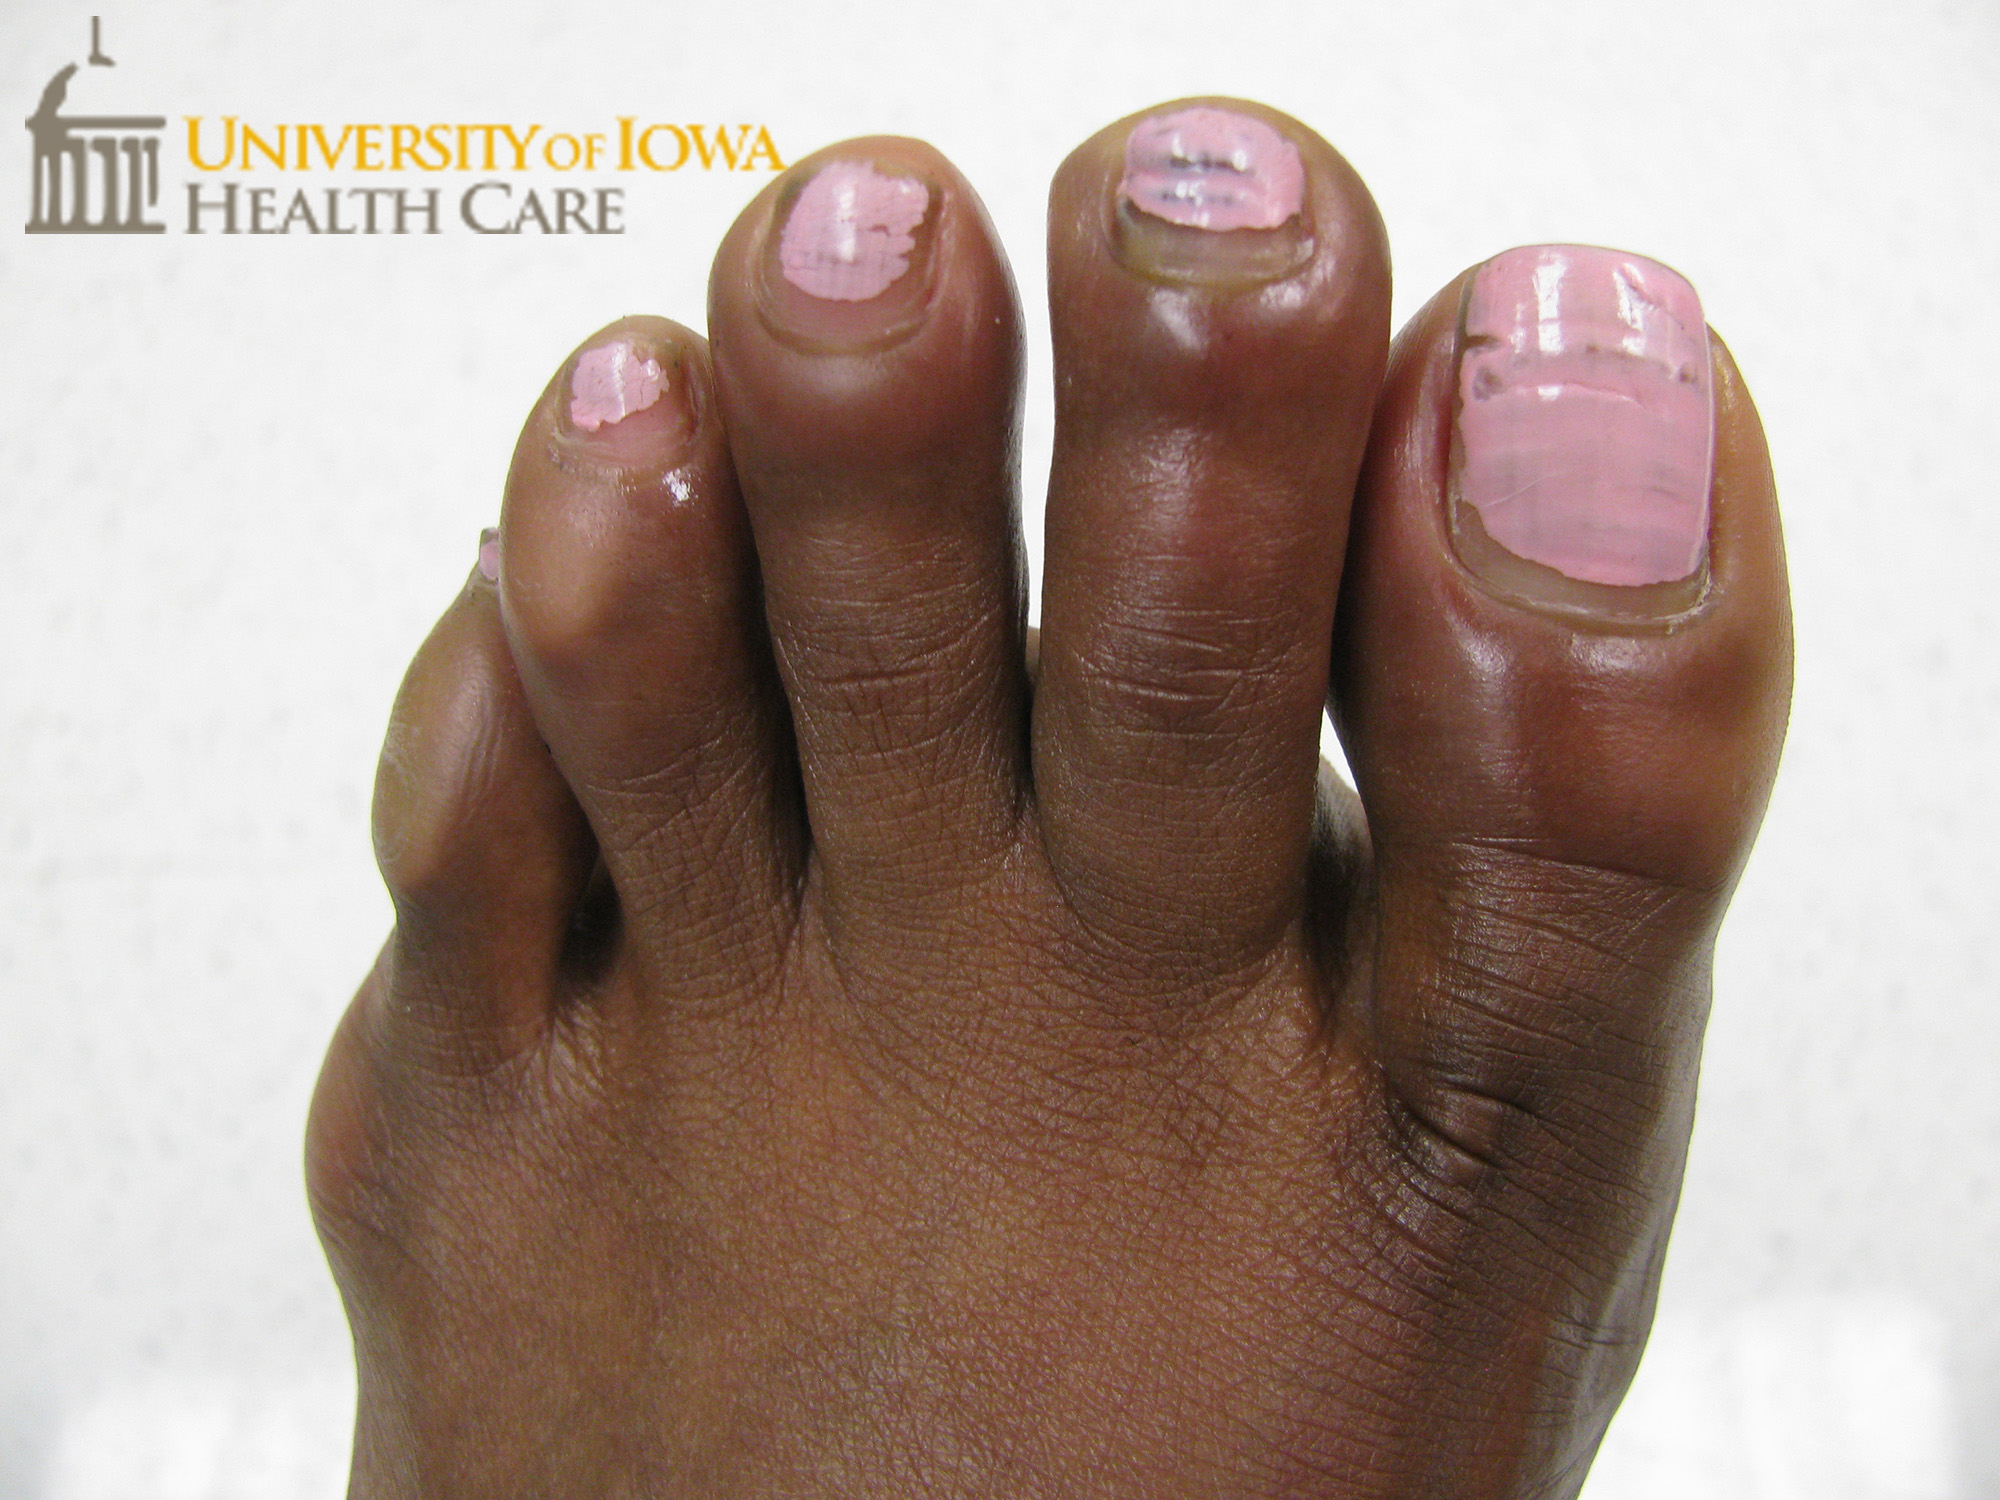 Erythema and edema of the toes. (click images for higher resolution).